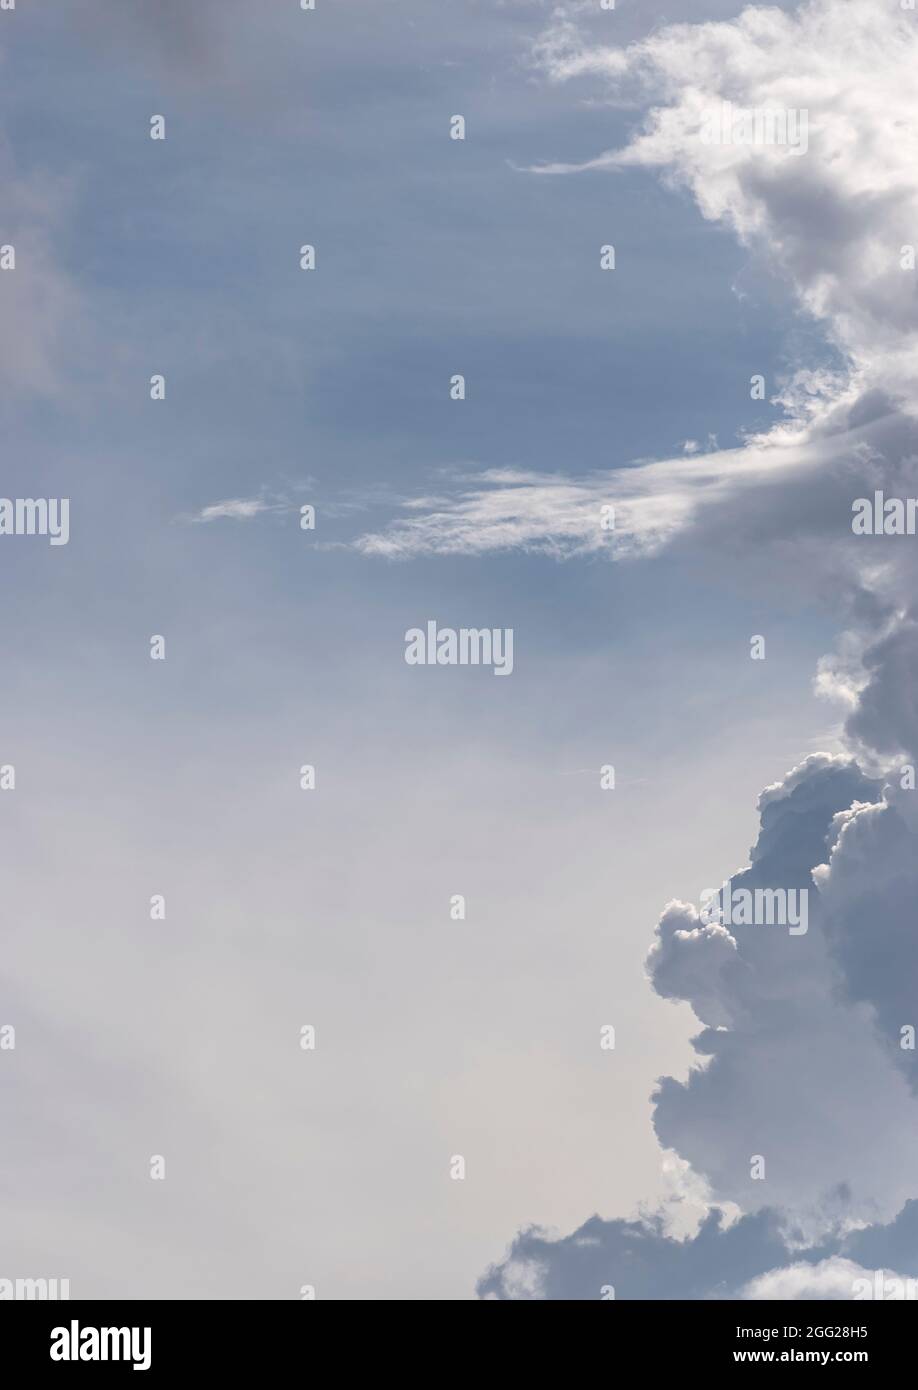 Evening sky with low sunlight and vertical bank of grey and white clouds. Copy space, background, autumn, Queensland, Australia. Stock Photo